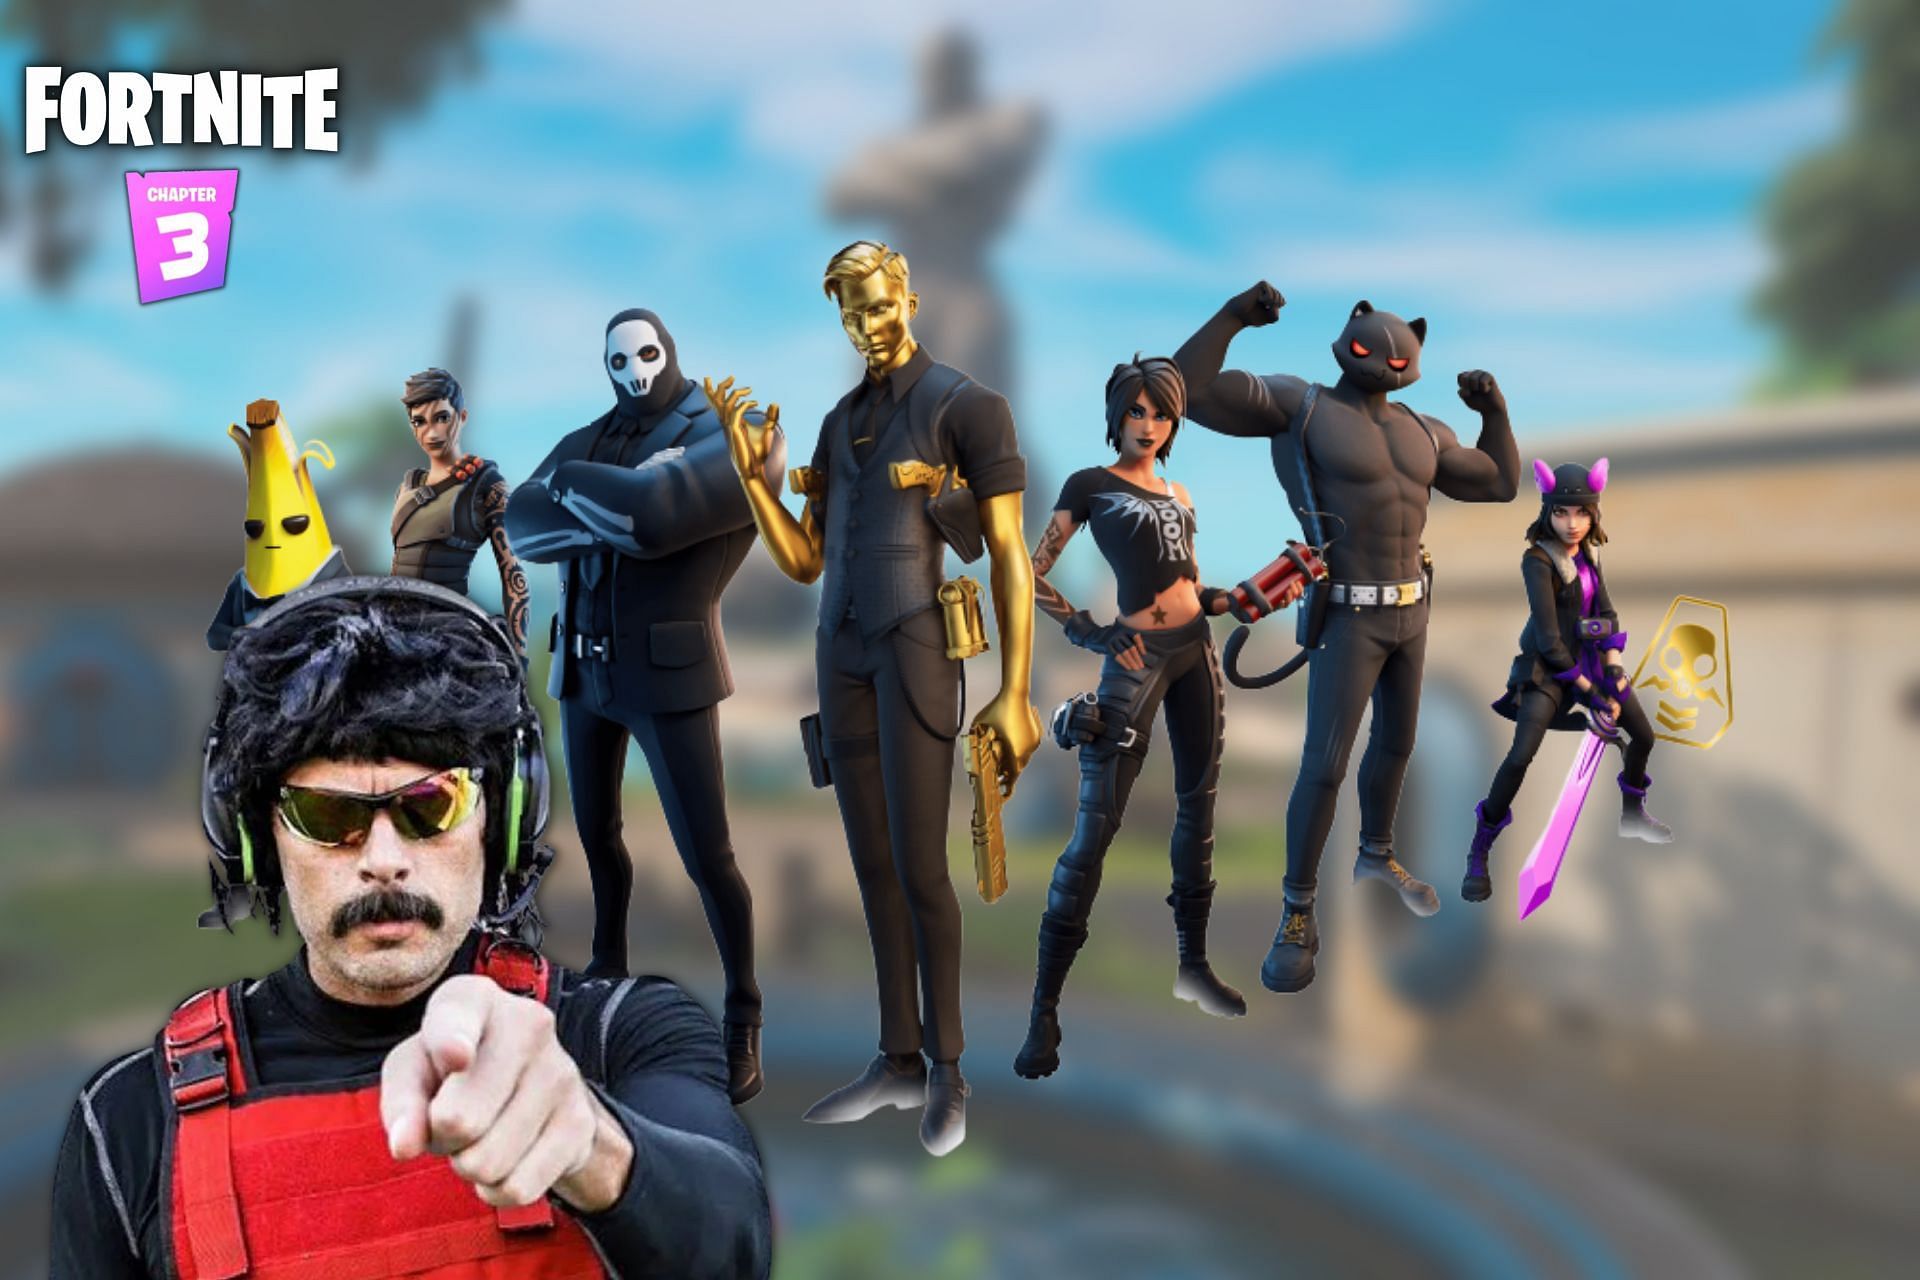 Dr Disrespect keen to try out Fortnite Chapter 3 (Image via Sportskeeda)